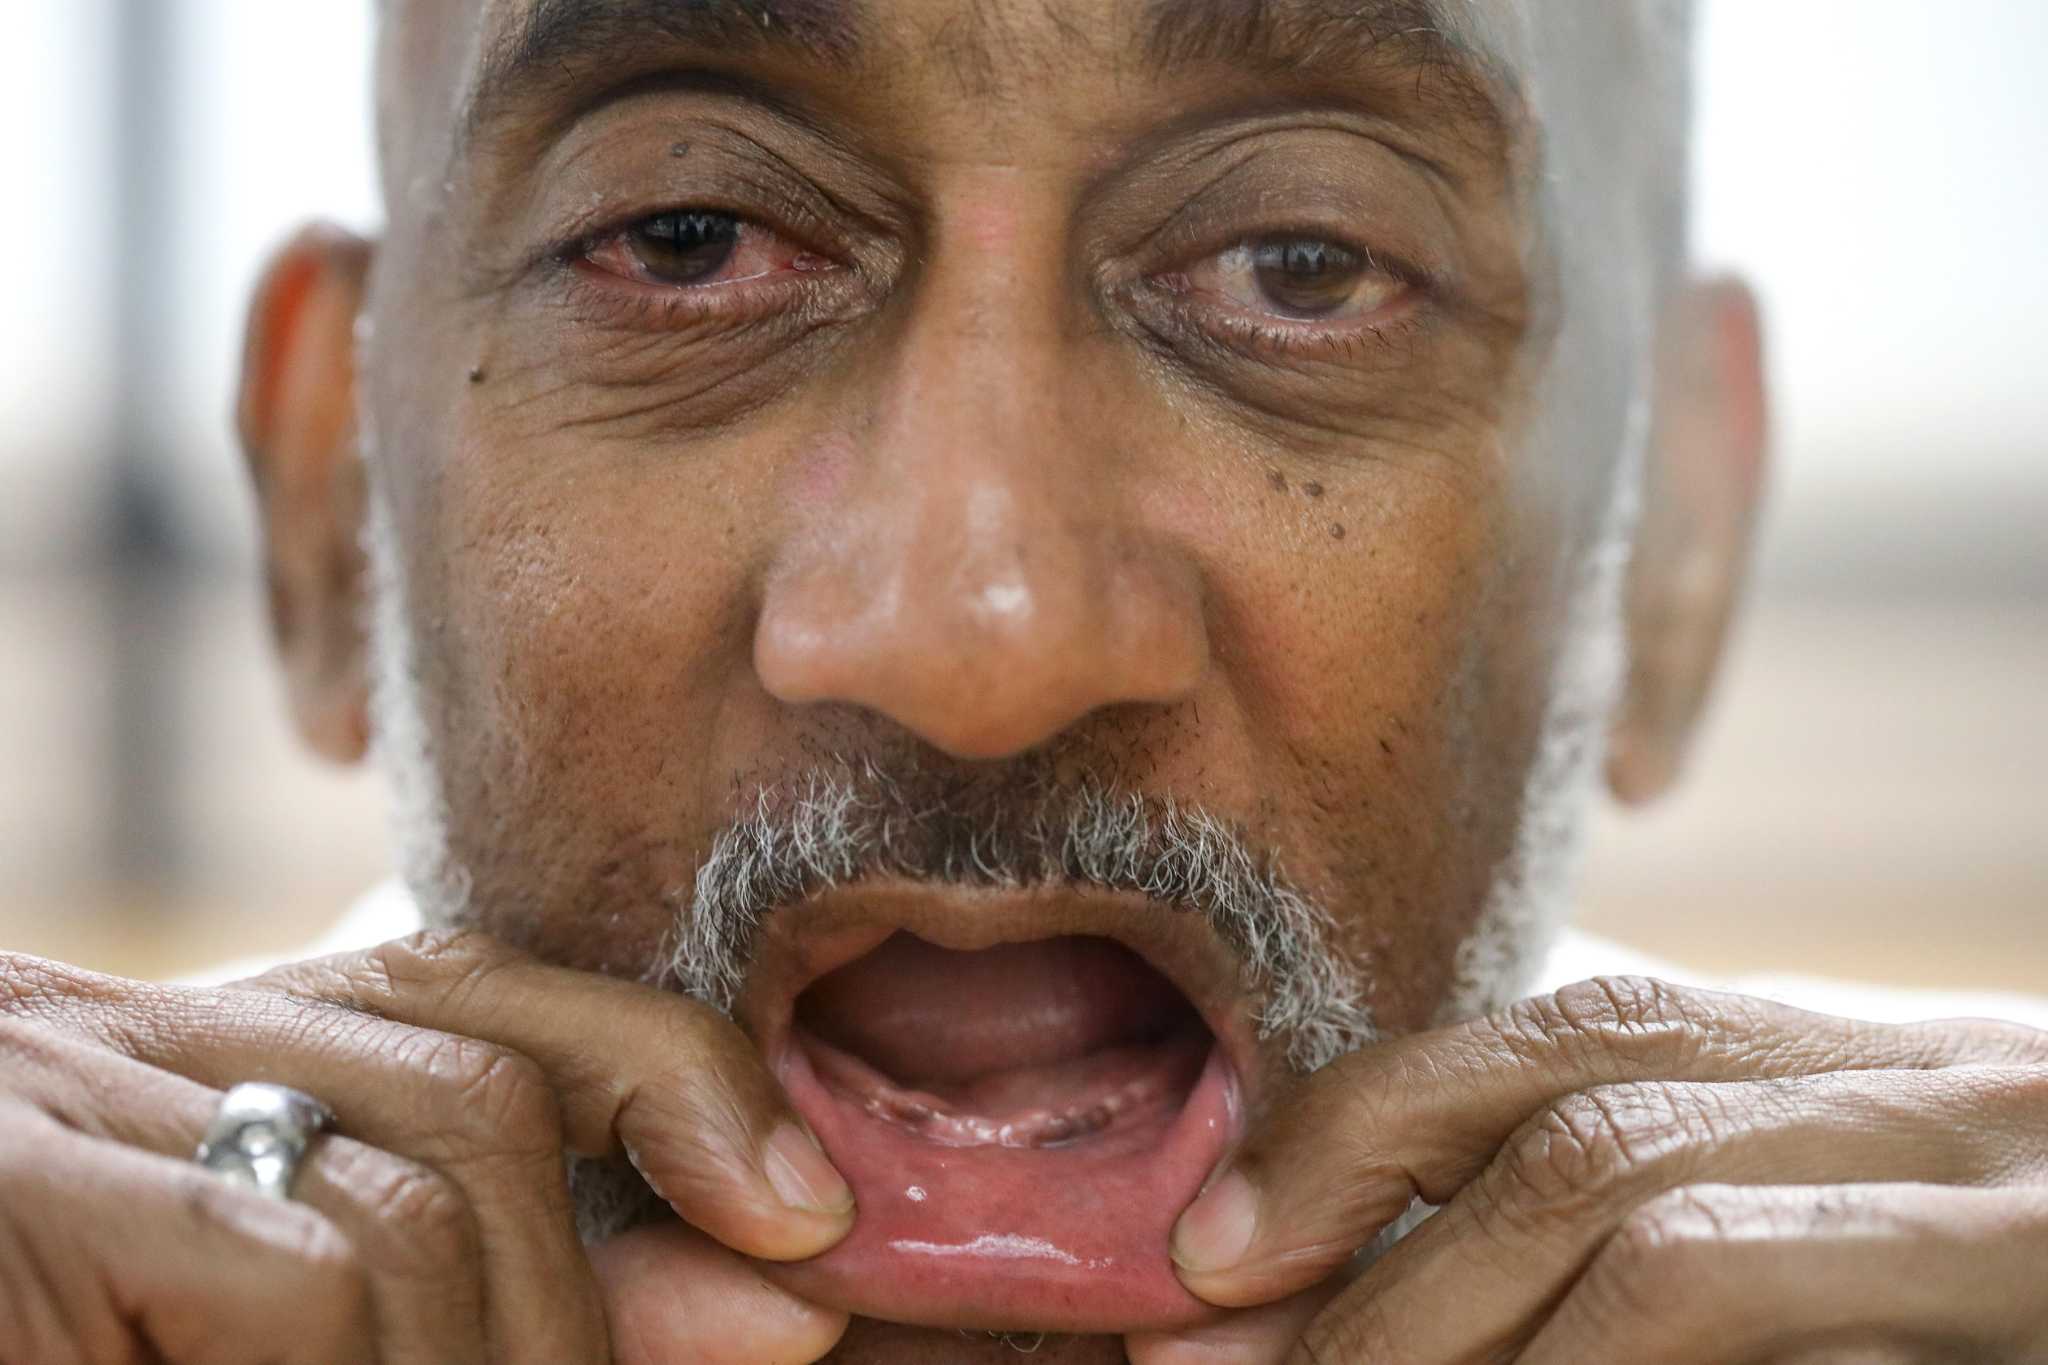 Toothless Texas inmates denied dentures in state prison